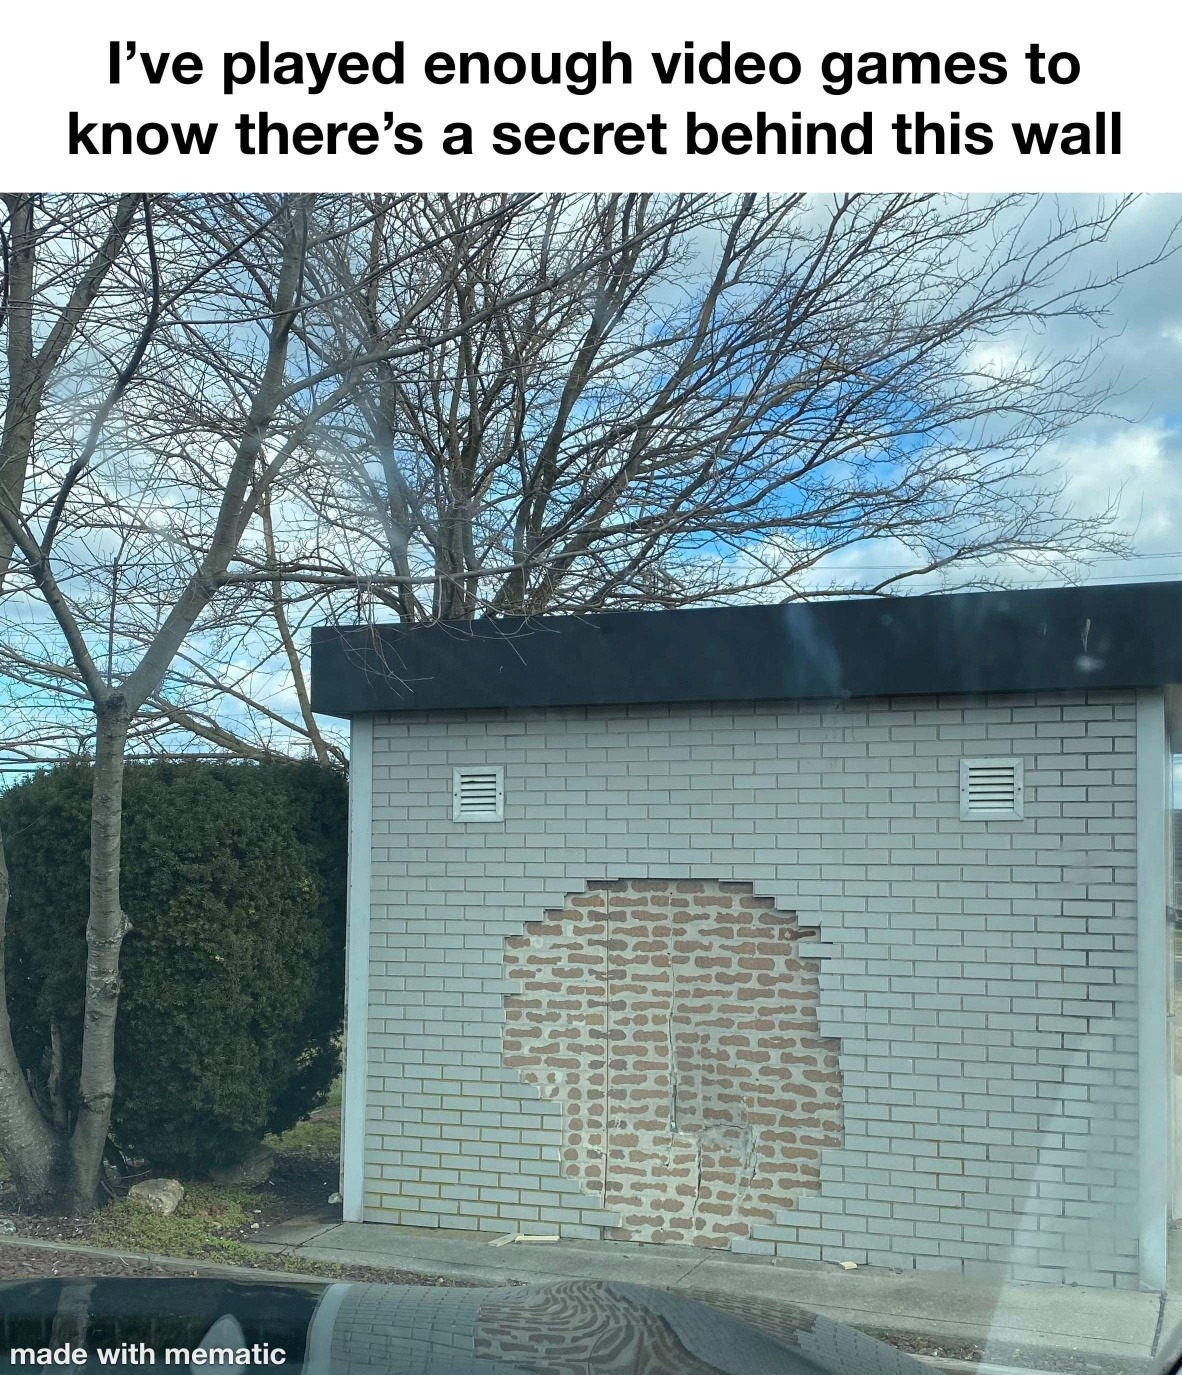 funny gaming memes - ve played enough video games to know - I've played enough video games to know there's a secret behind this wall made with mematic